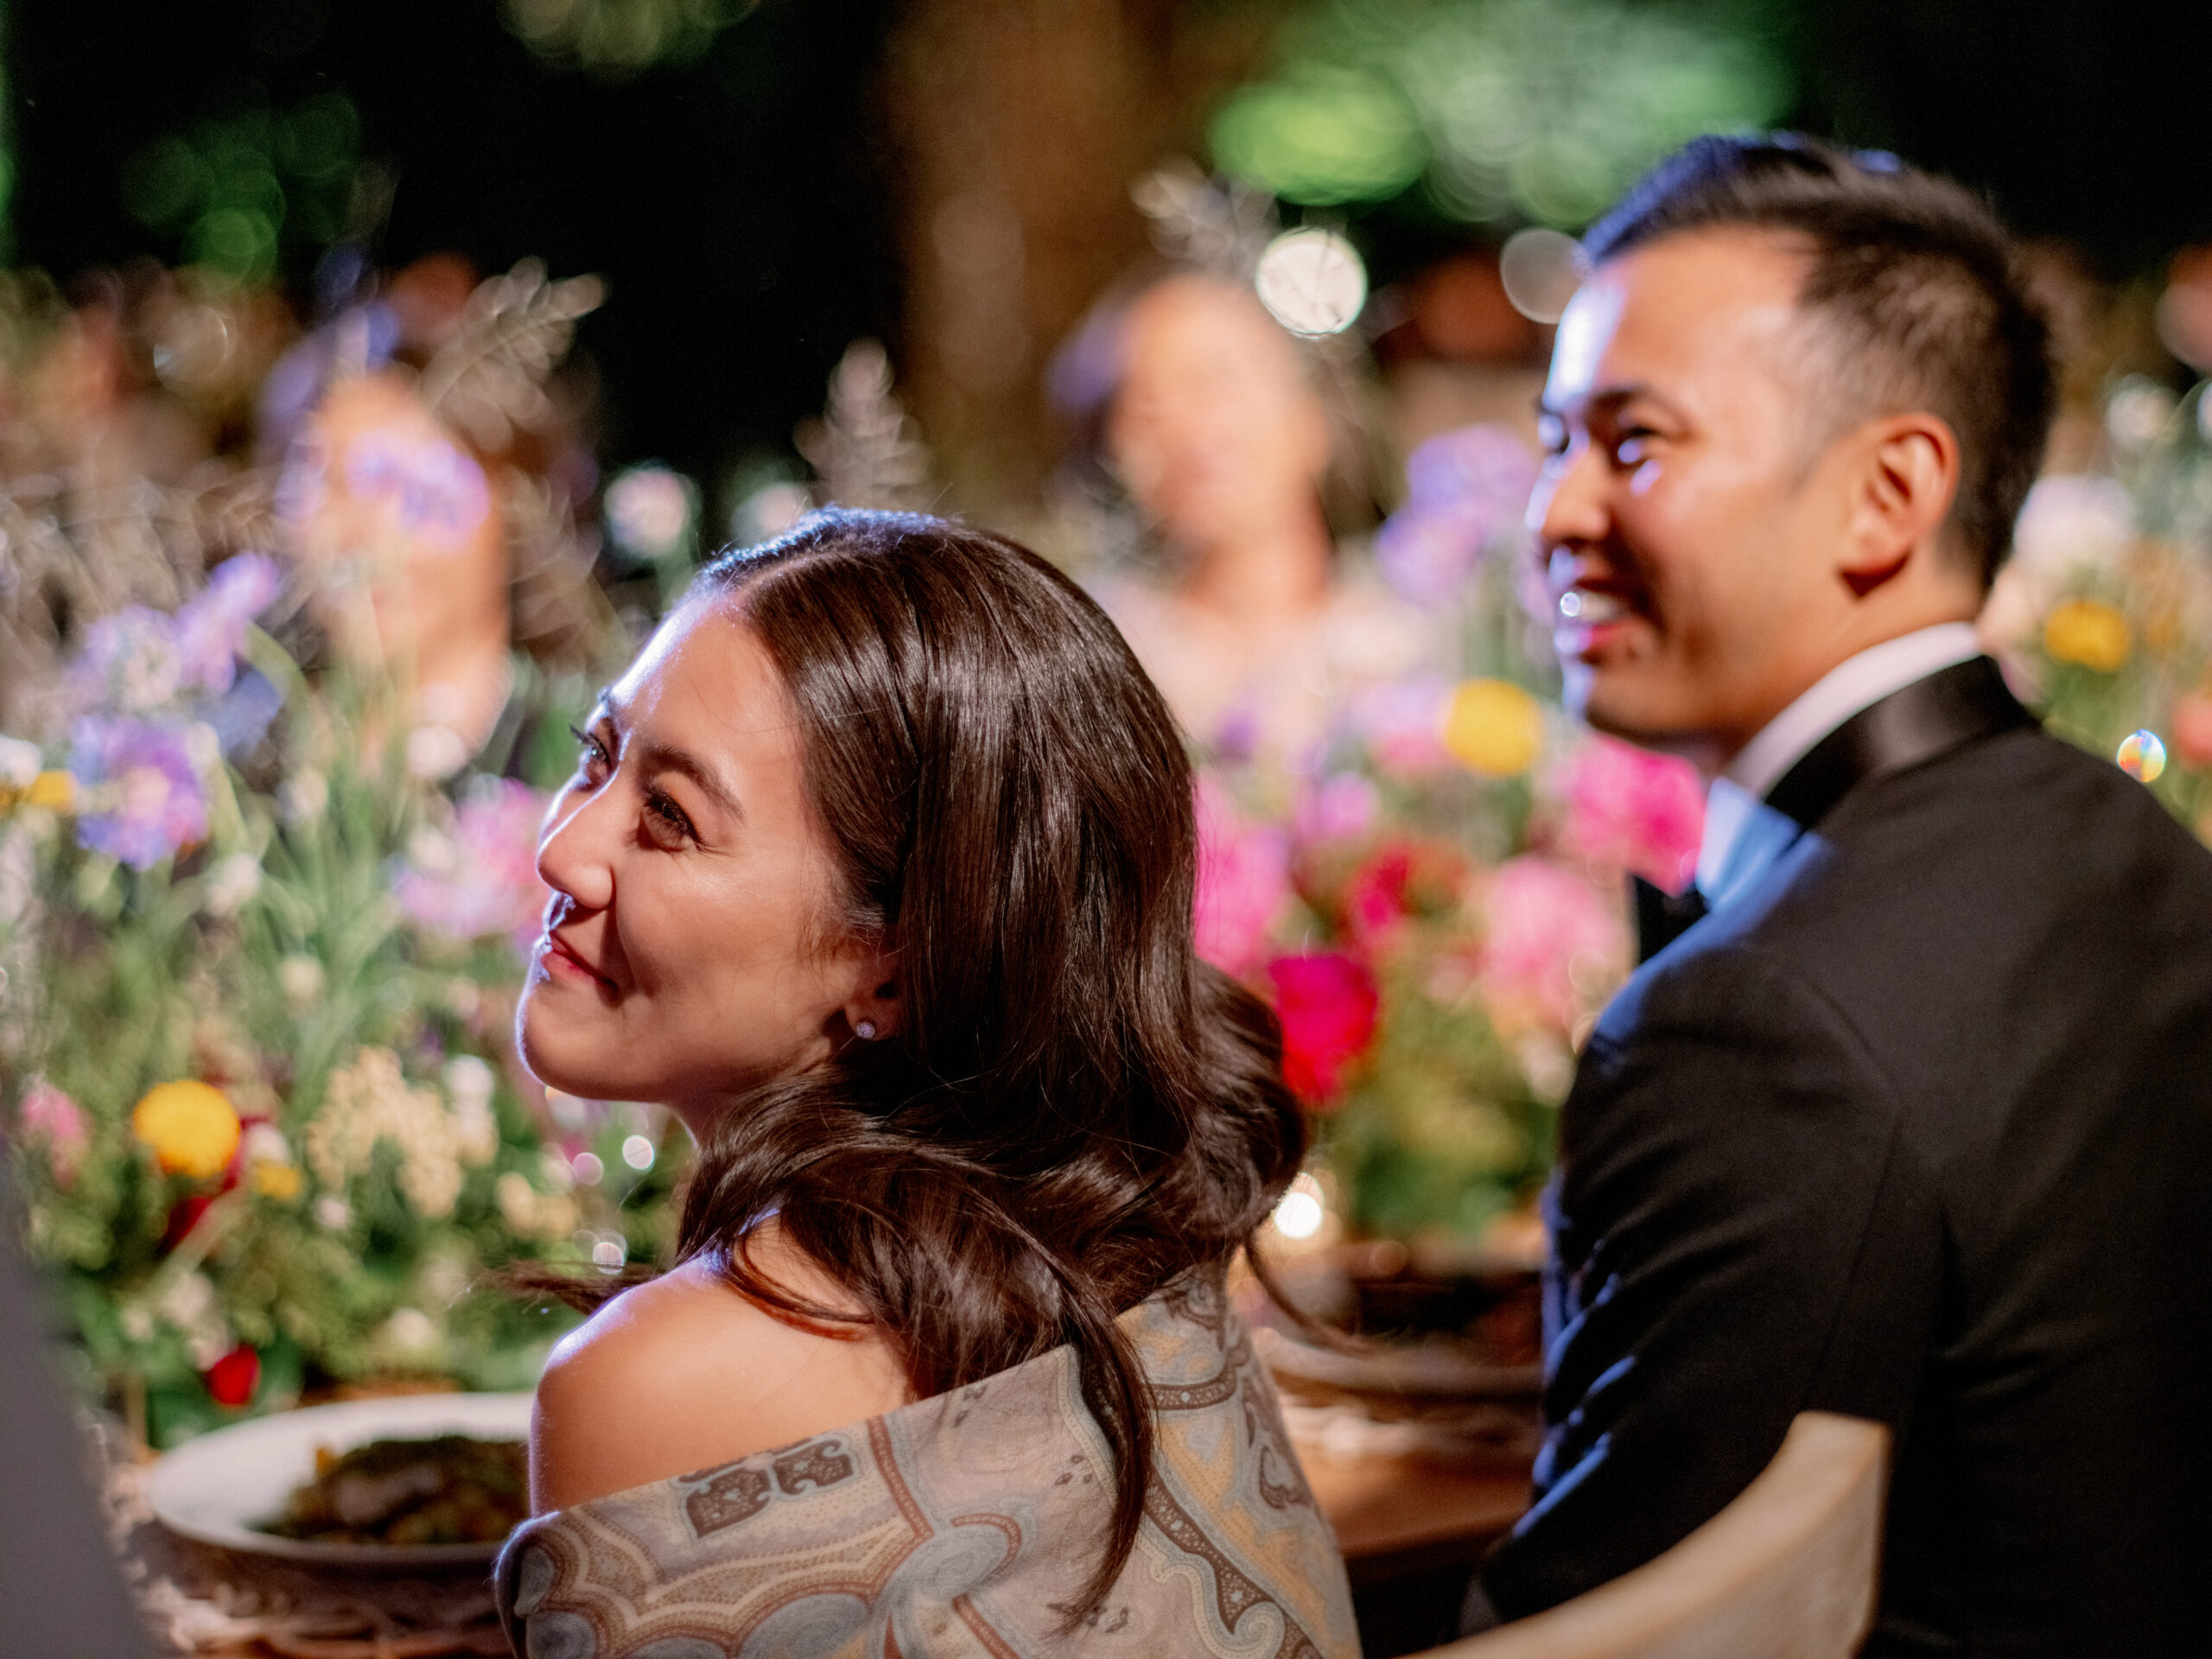 The newlyweds are smiling as they watch the program in their wedding reception. Image by Jenny Fu Studio